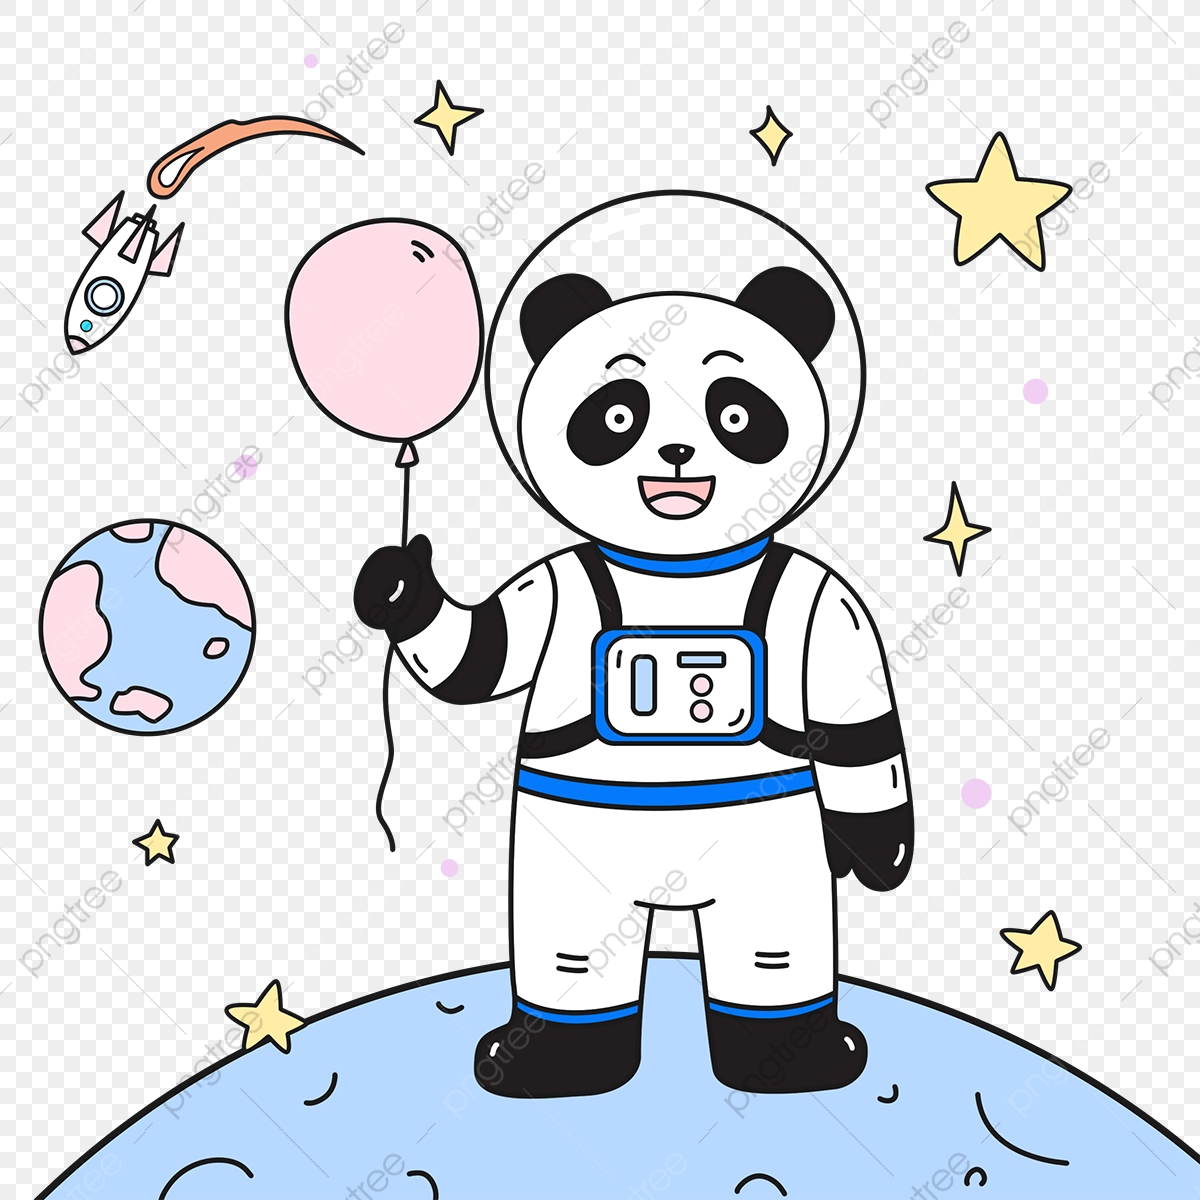 Astronaut Holding Of Colorful Balloons Wallpapers